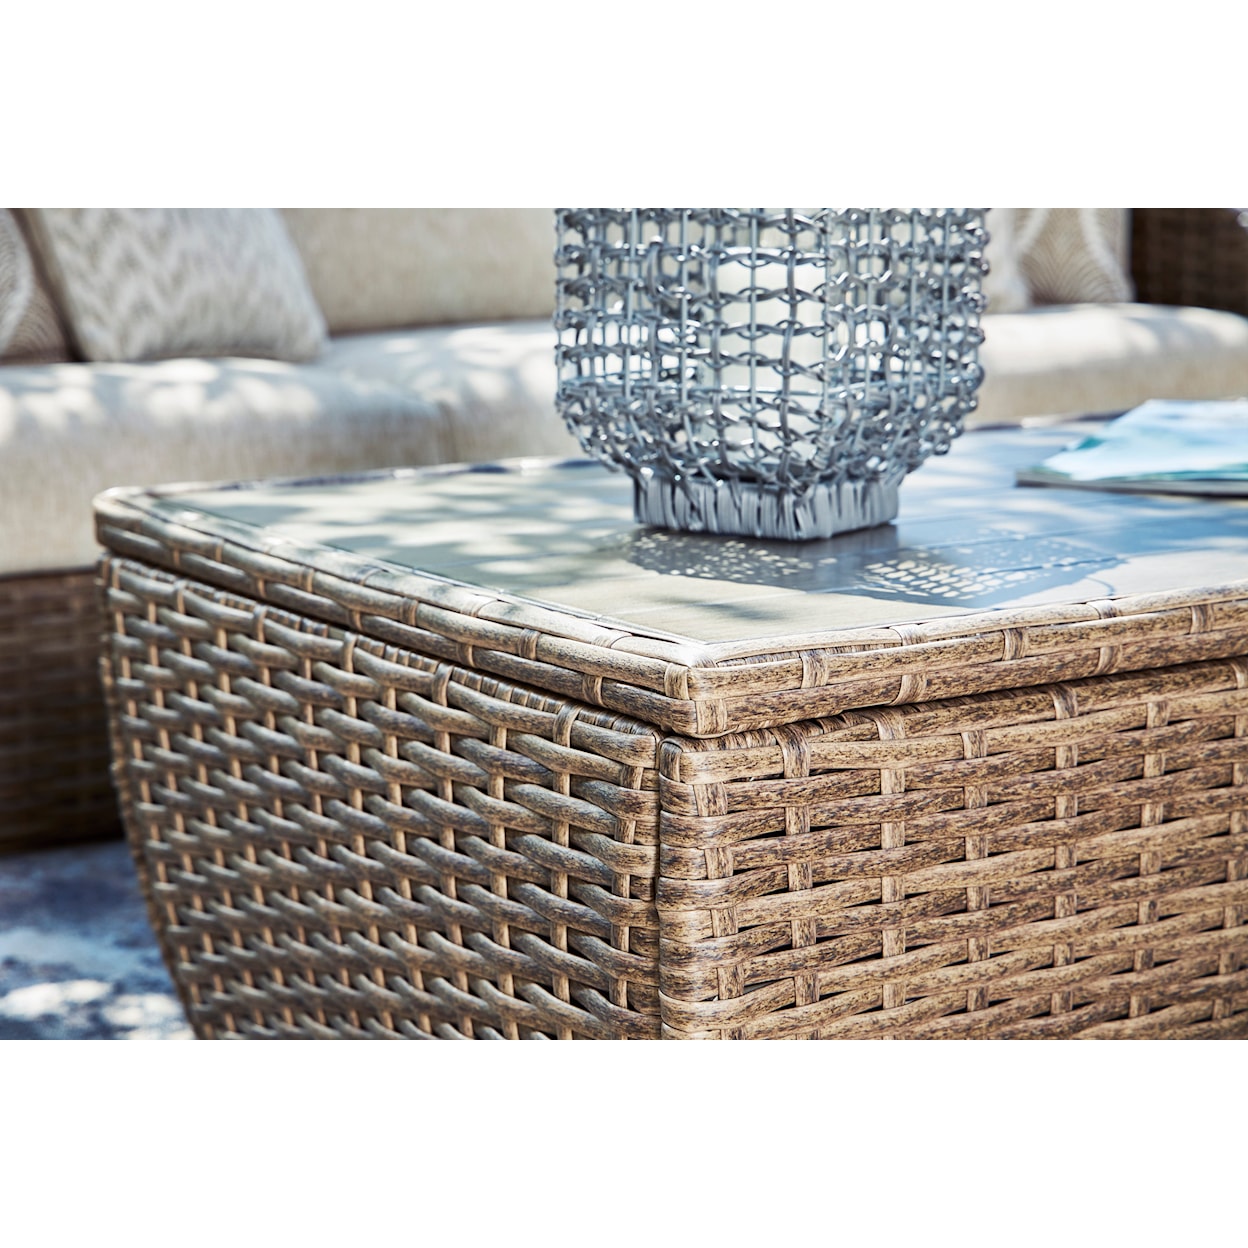 Ashley Furniture Signature Design Sandy Bloom Outdoor Coffee Table